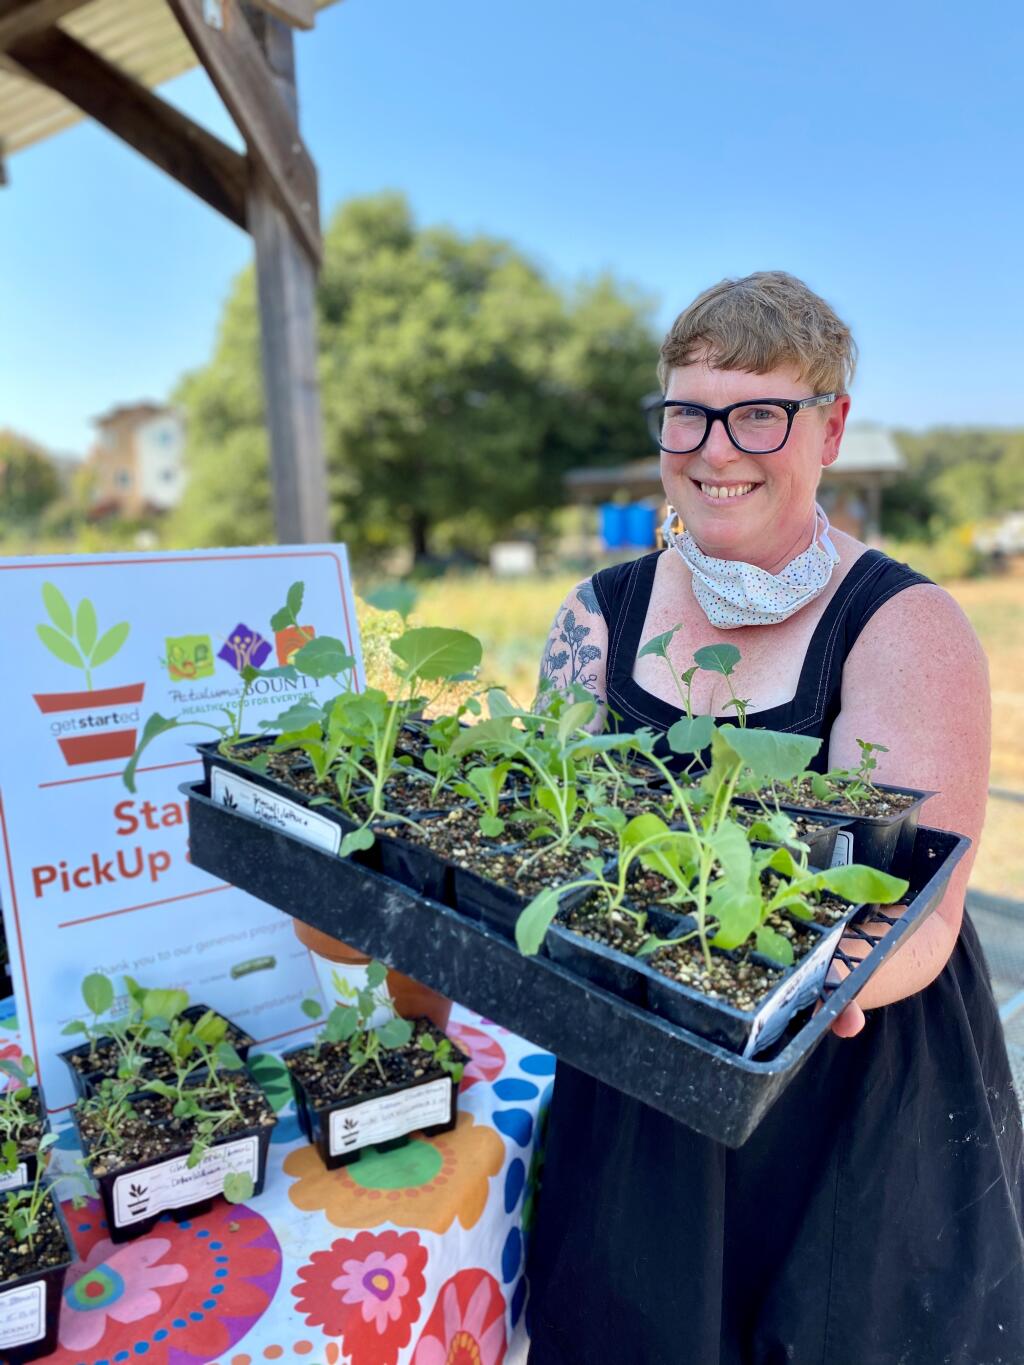 Emma Logan dropping off an impressive 20 start kits last year. The getstarted program managed to distribute 300 vegetable starter packs to 255 families in 2020, and is seeking volunteers again to start the seedlings.  Volunteers asked to sign up at getstarted.garden by March 31. (COURTESY OF GETSTARTED)